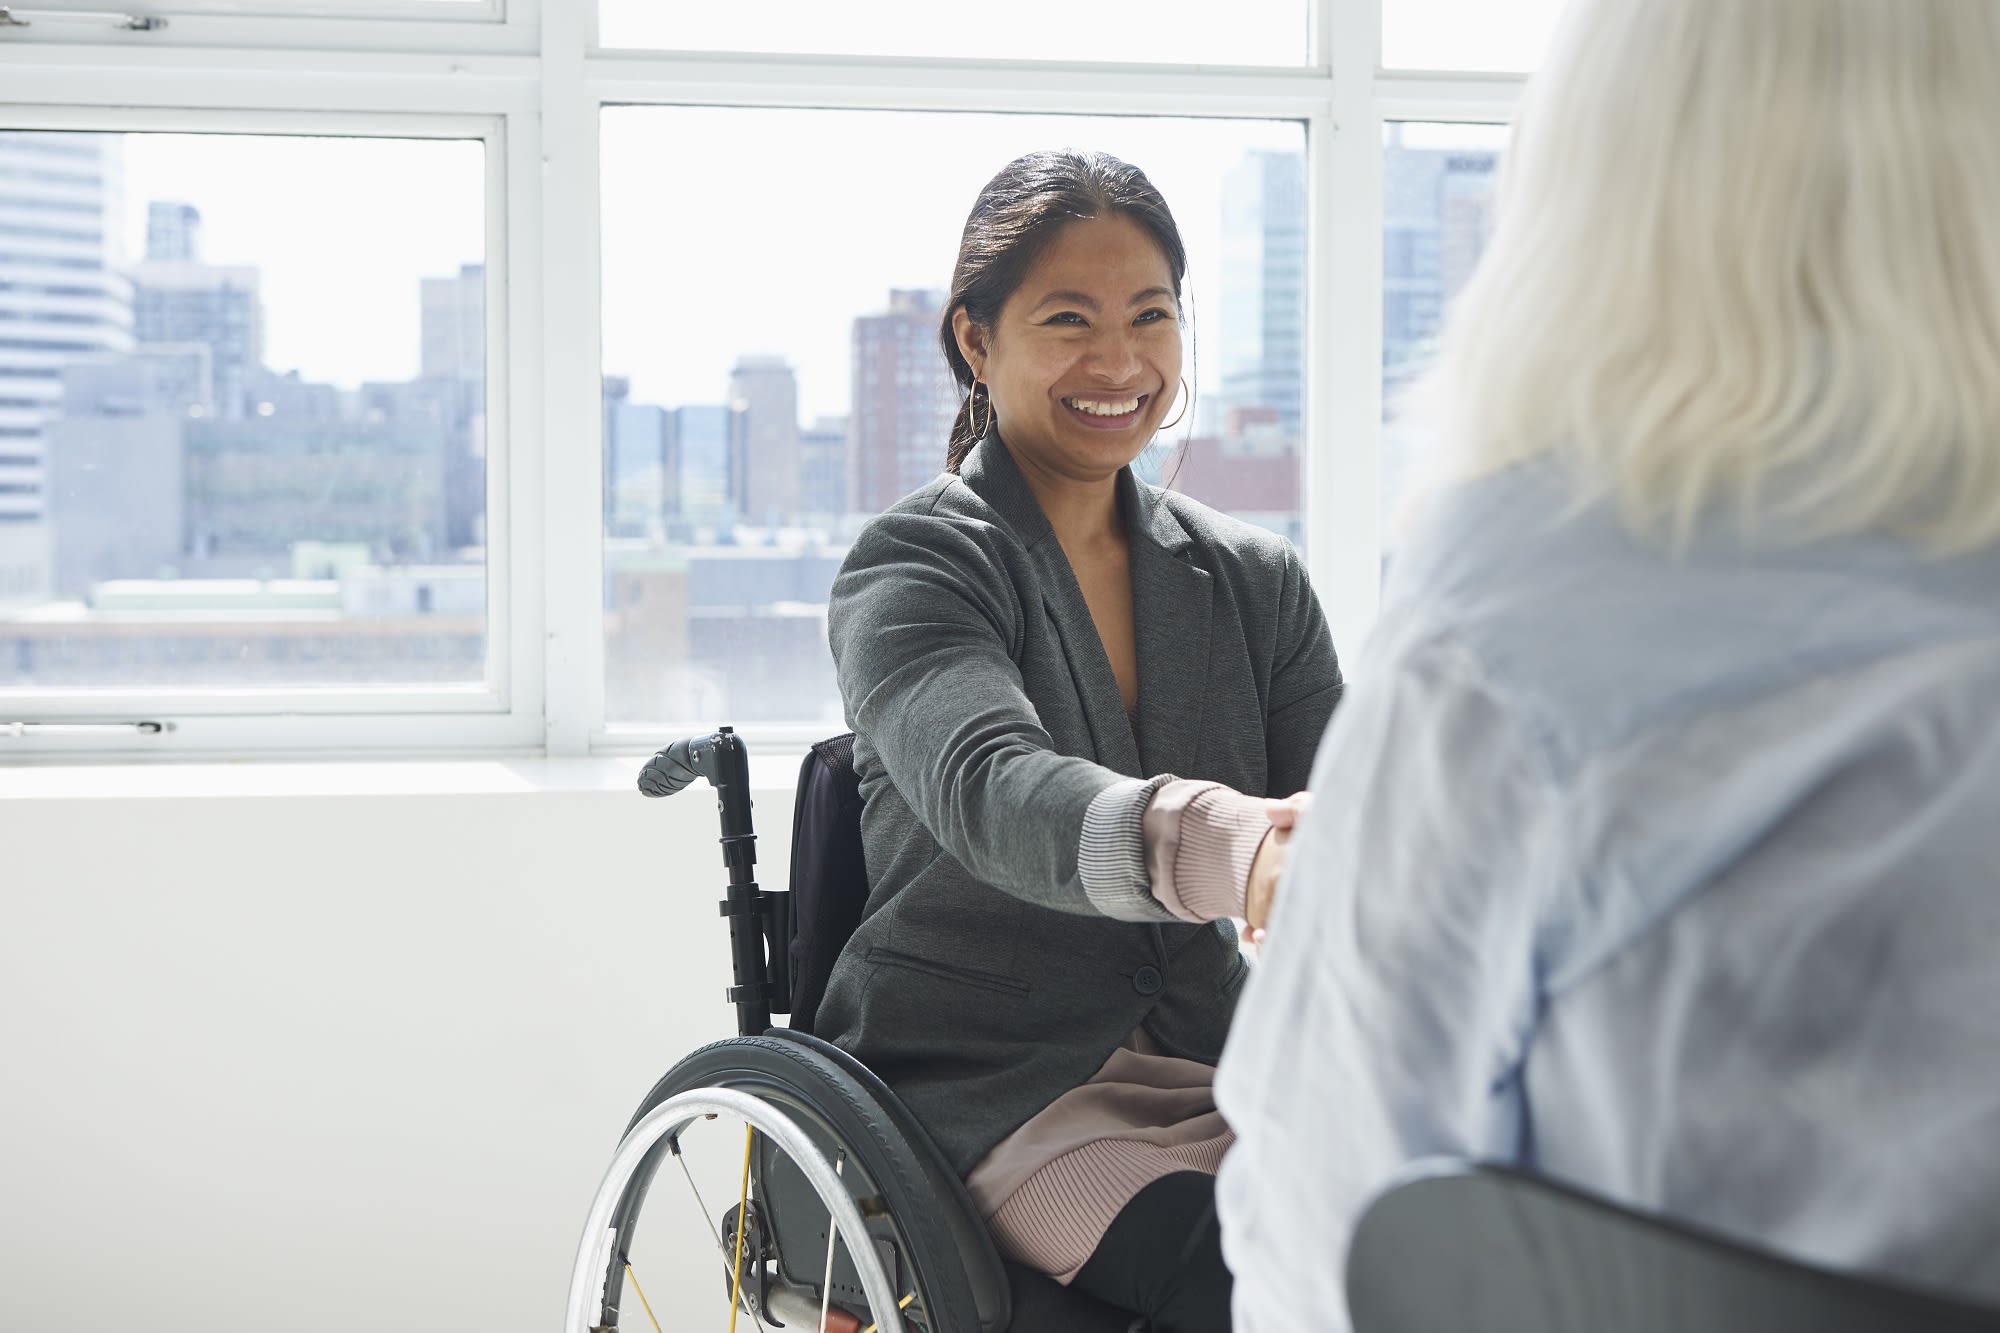 Unemployment rate among people with disabilities is still high